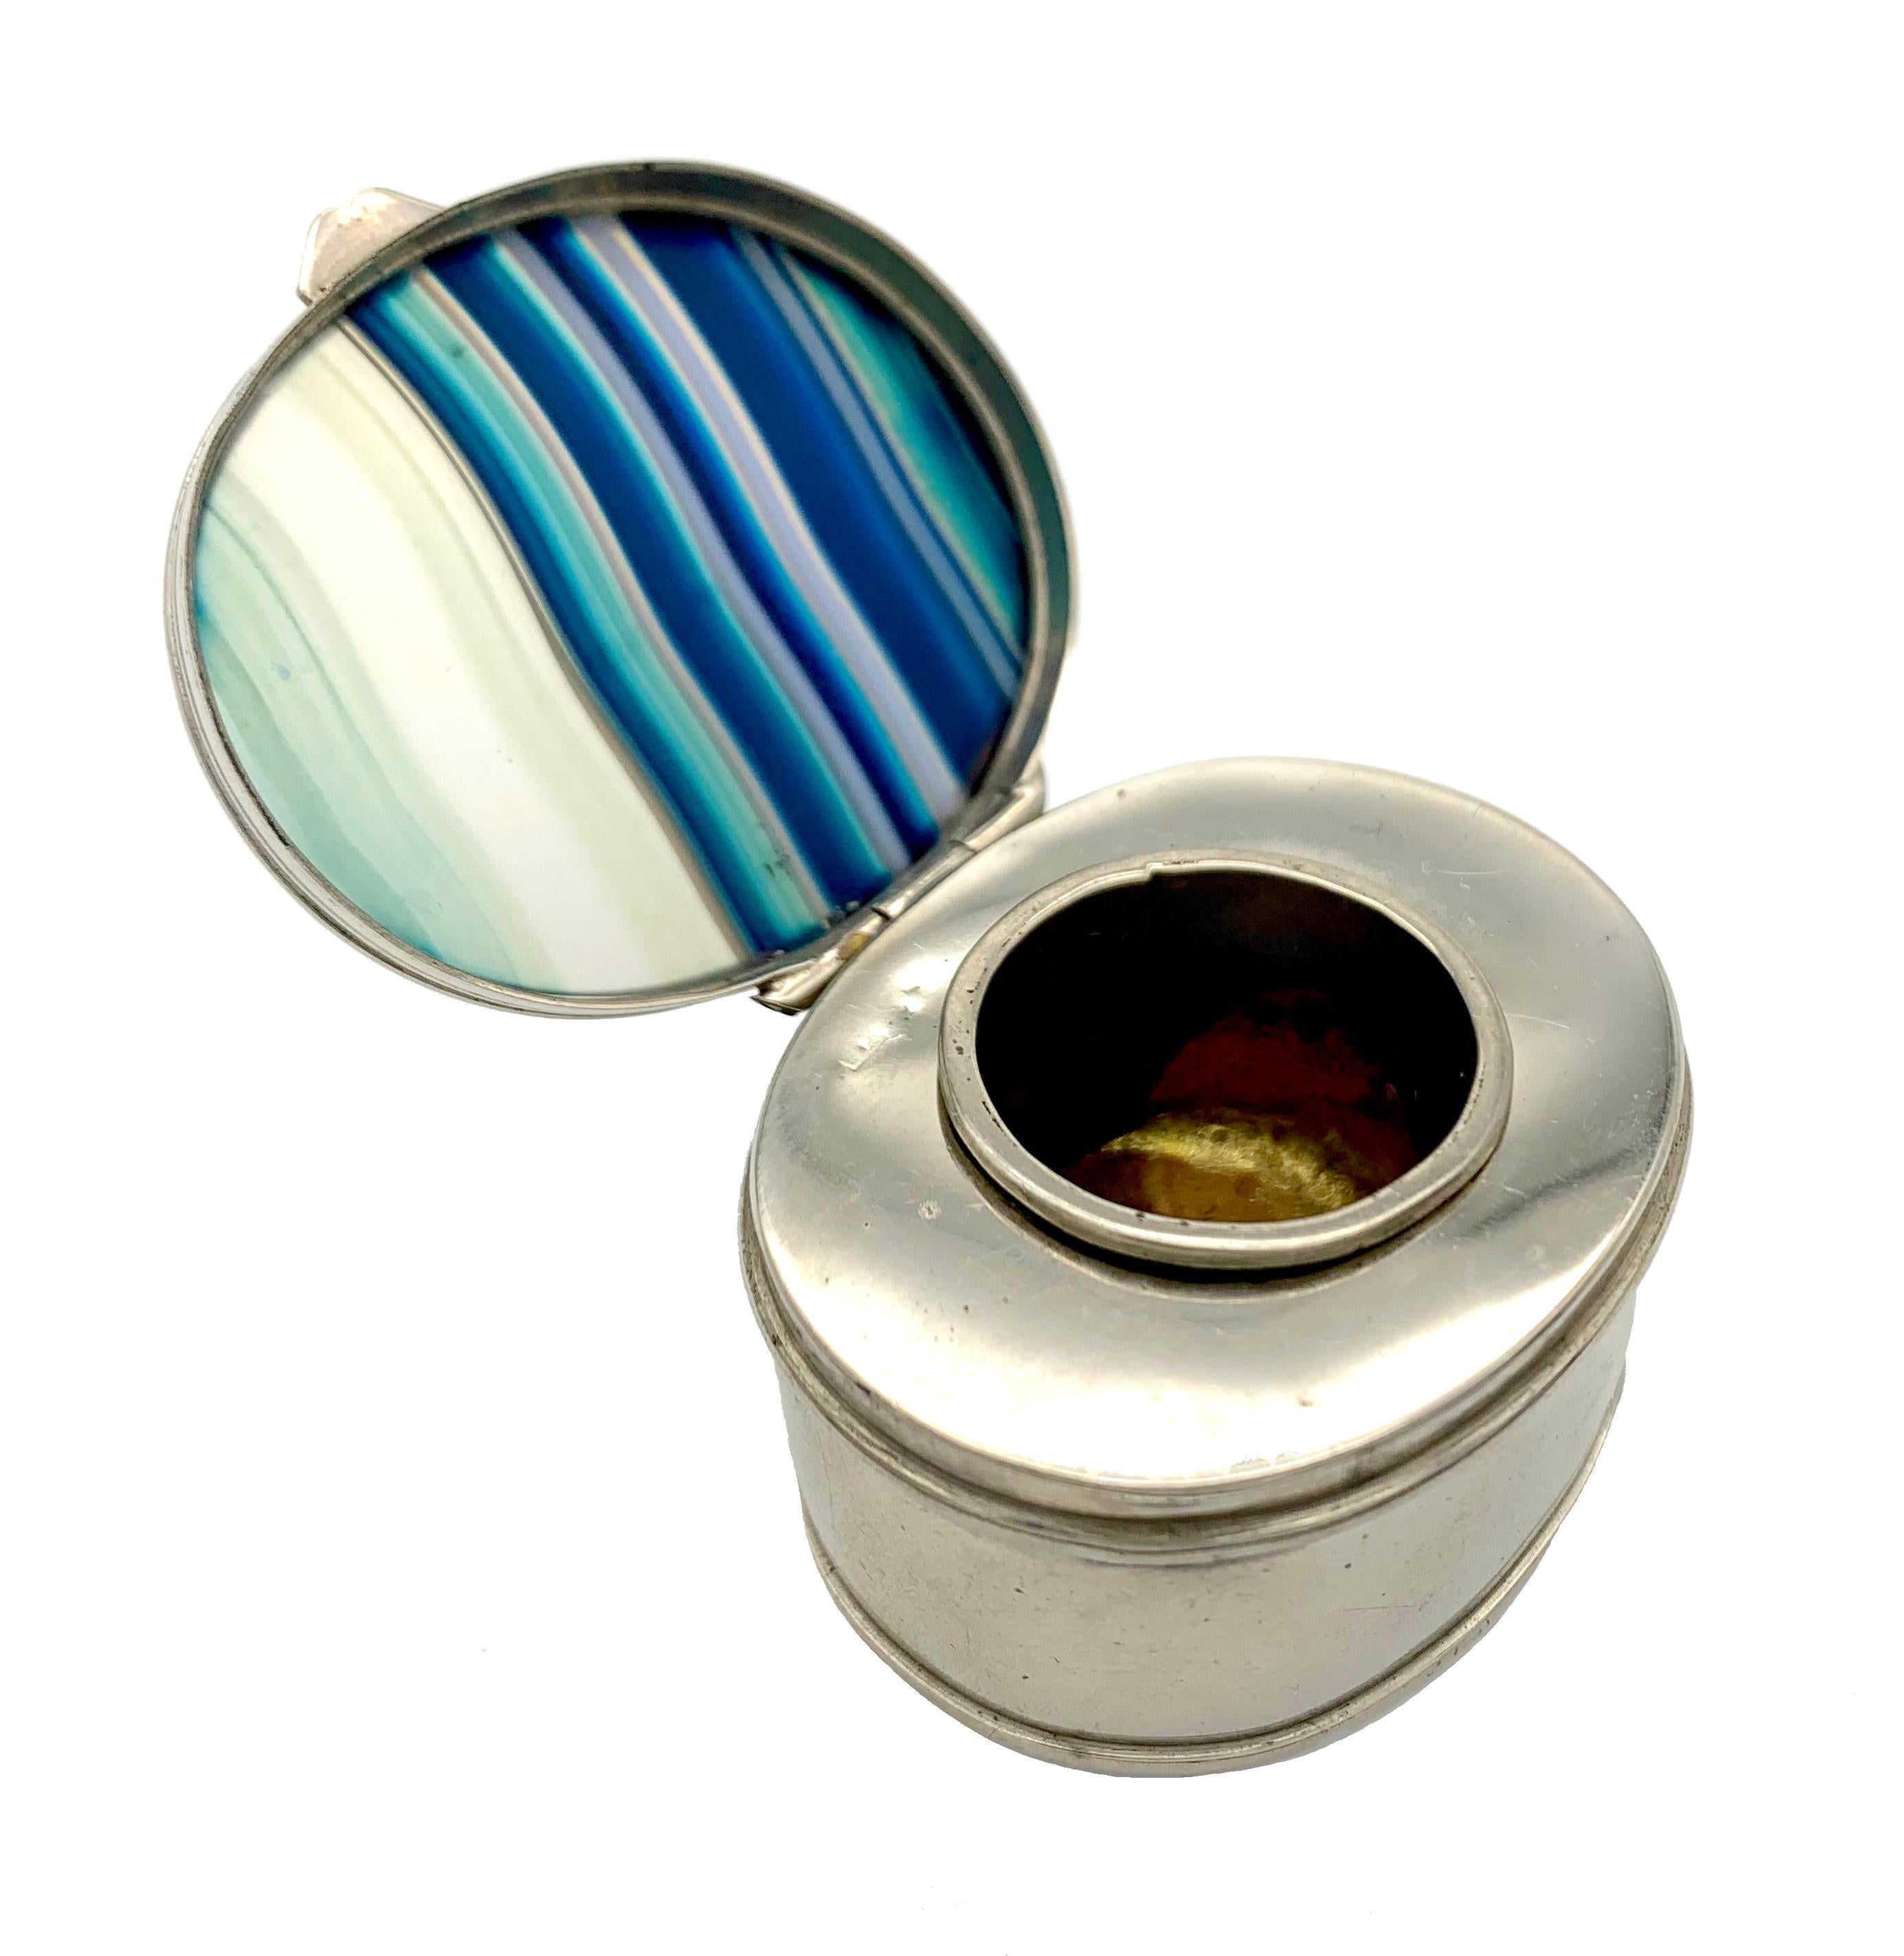 This little elegant travelling inkwell is made out of plated silver. The lid and the bottom of the box are set with slices of agate dyed blue.